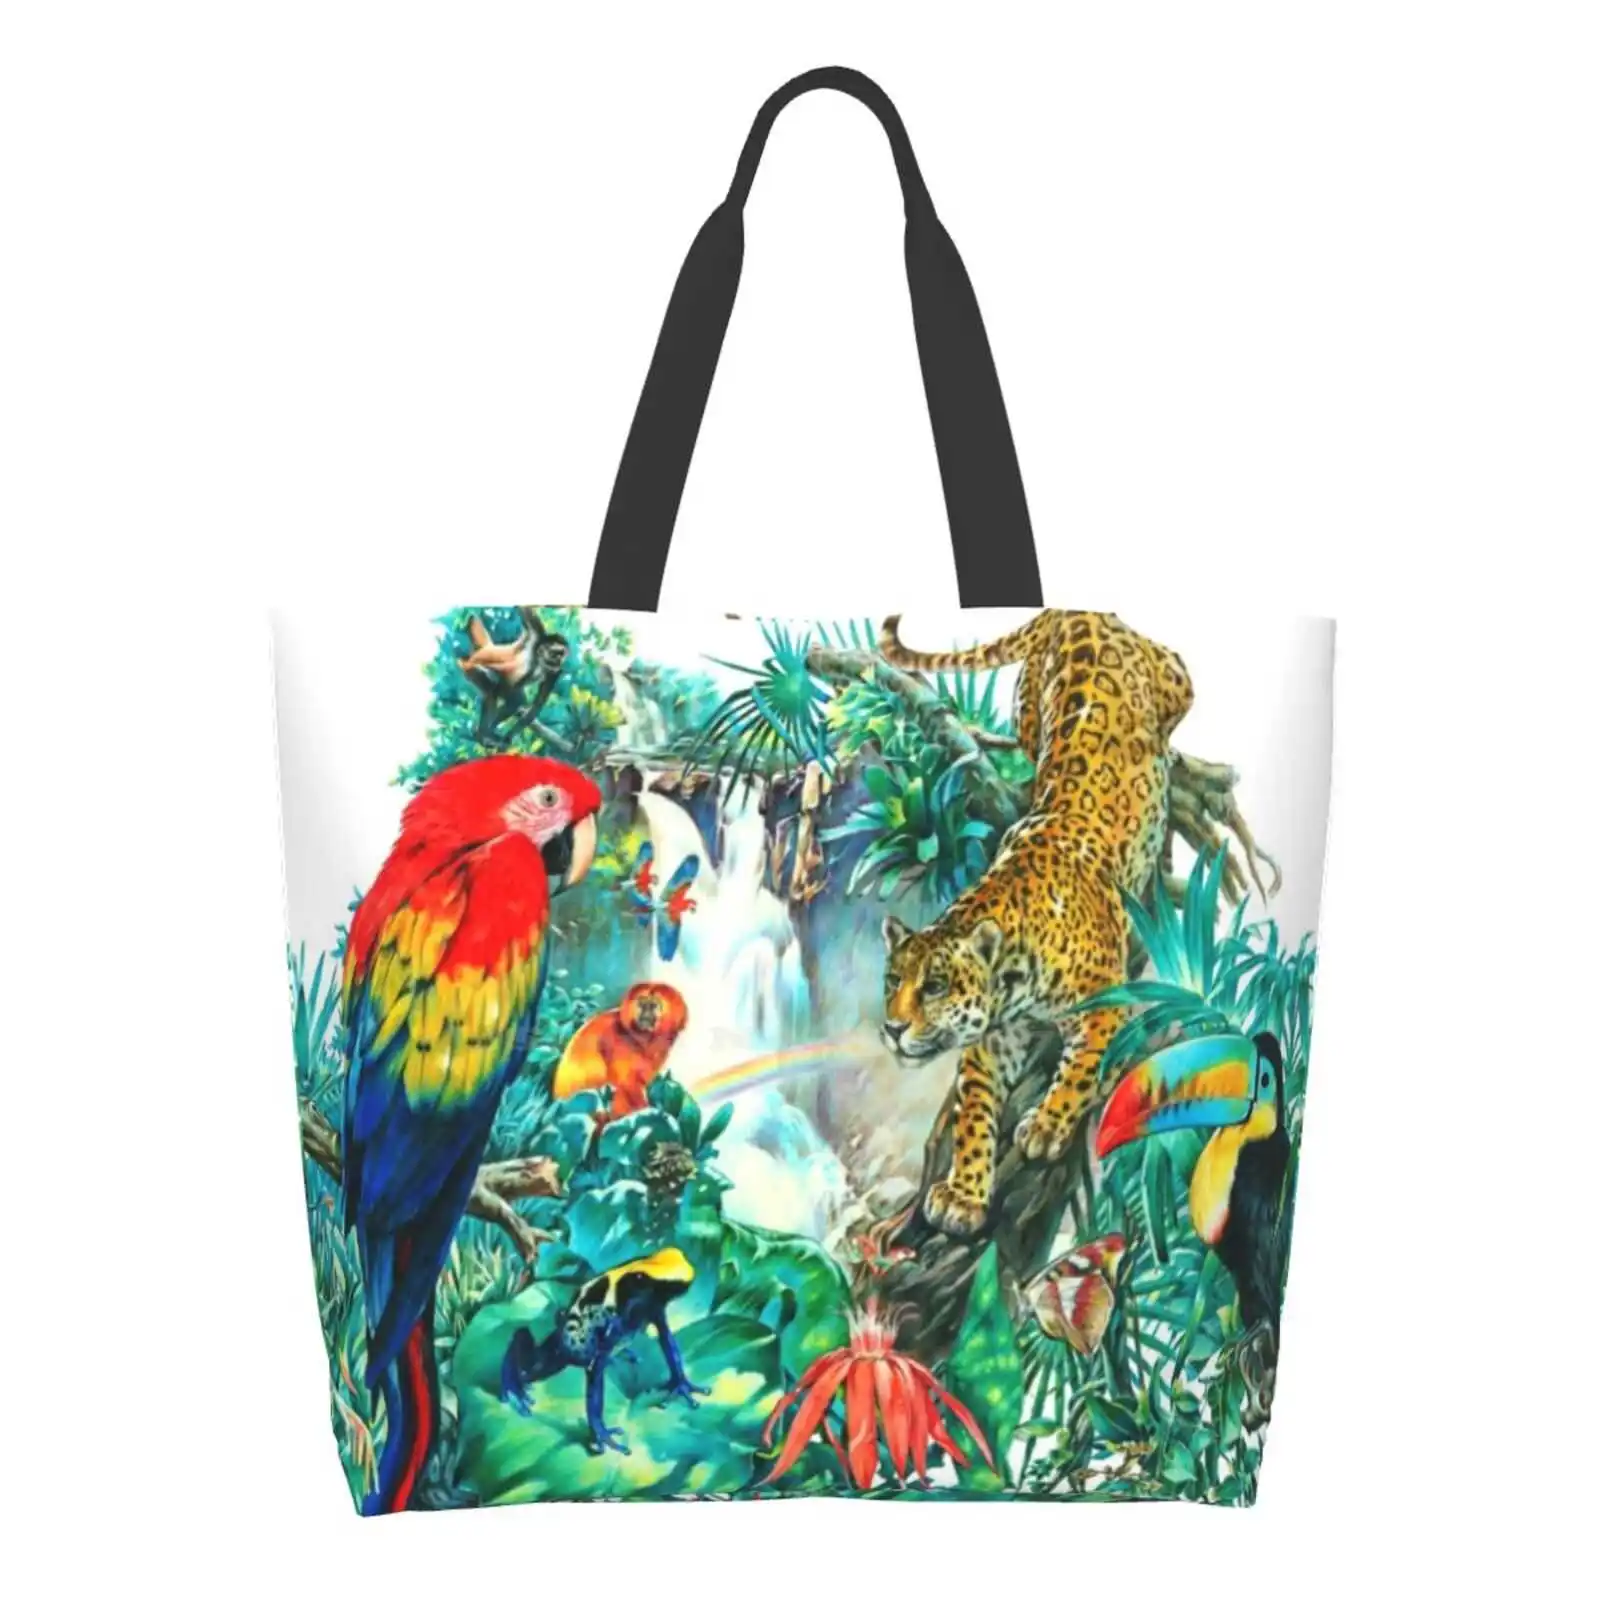 

Tropical Rainforest Shopping Bags Fashion Casual Pacakge Hand Bag Toucan Macaw Frogs Poison Dart Frog Monkey Rainforest